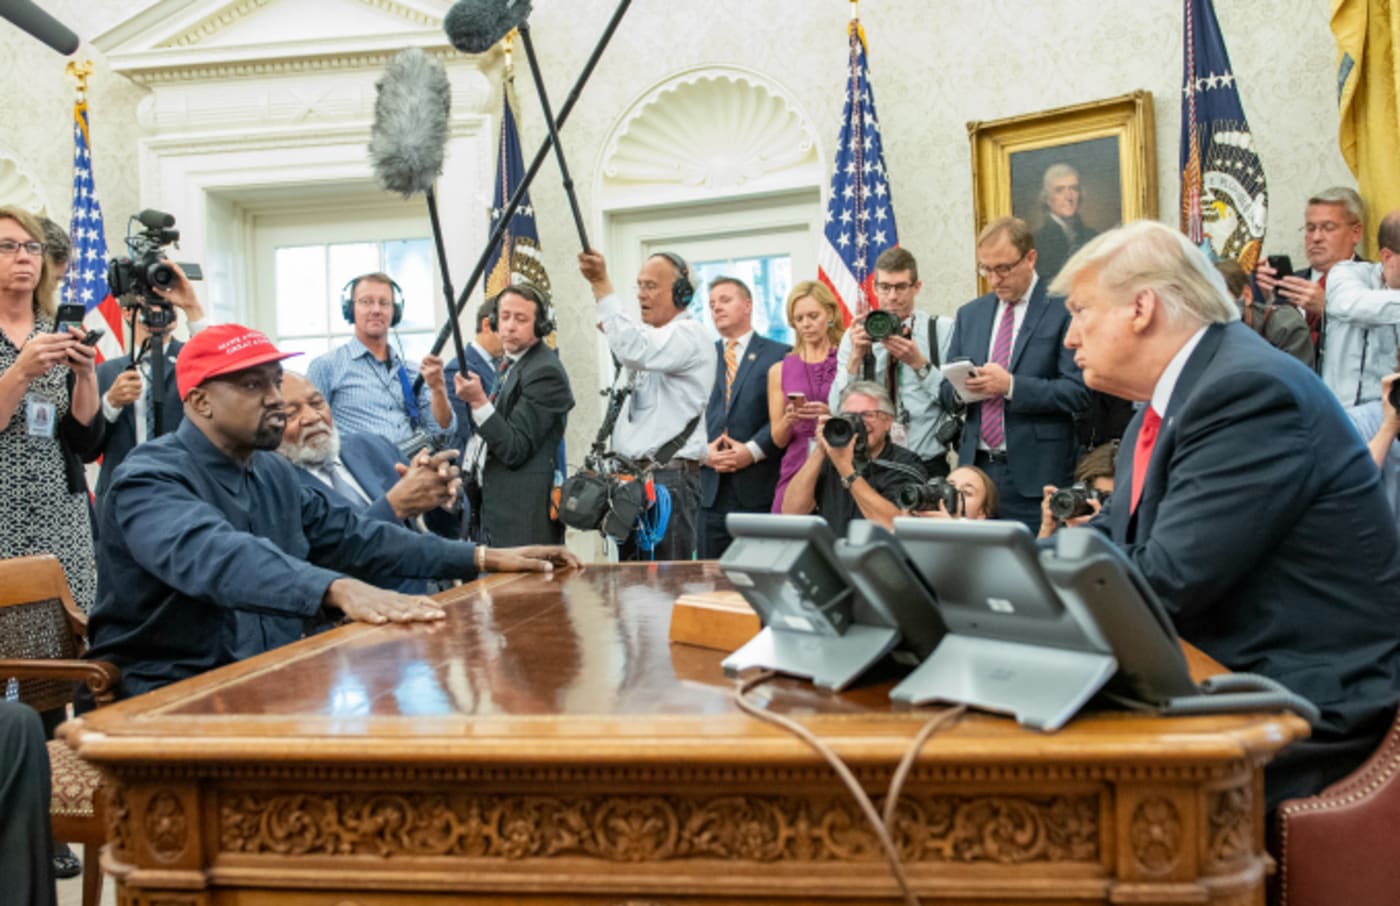 Kanye West has lunch with President Trump